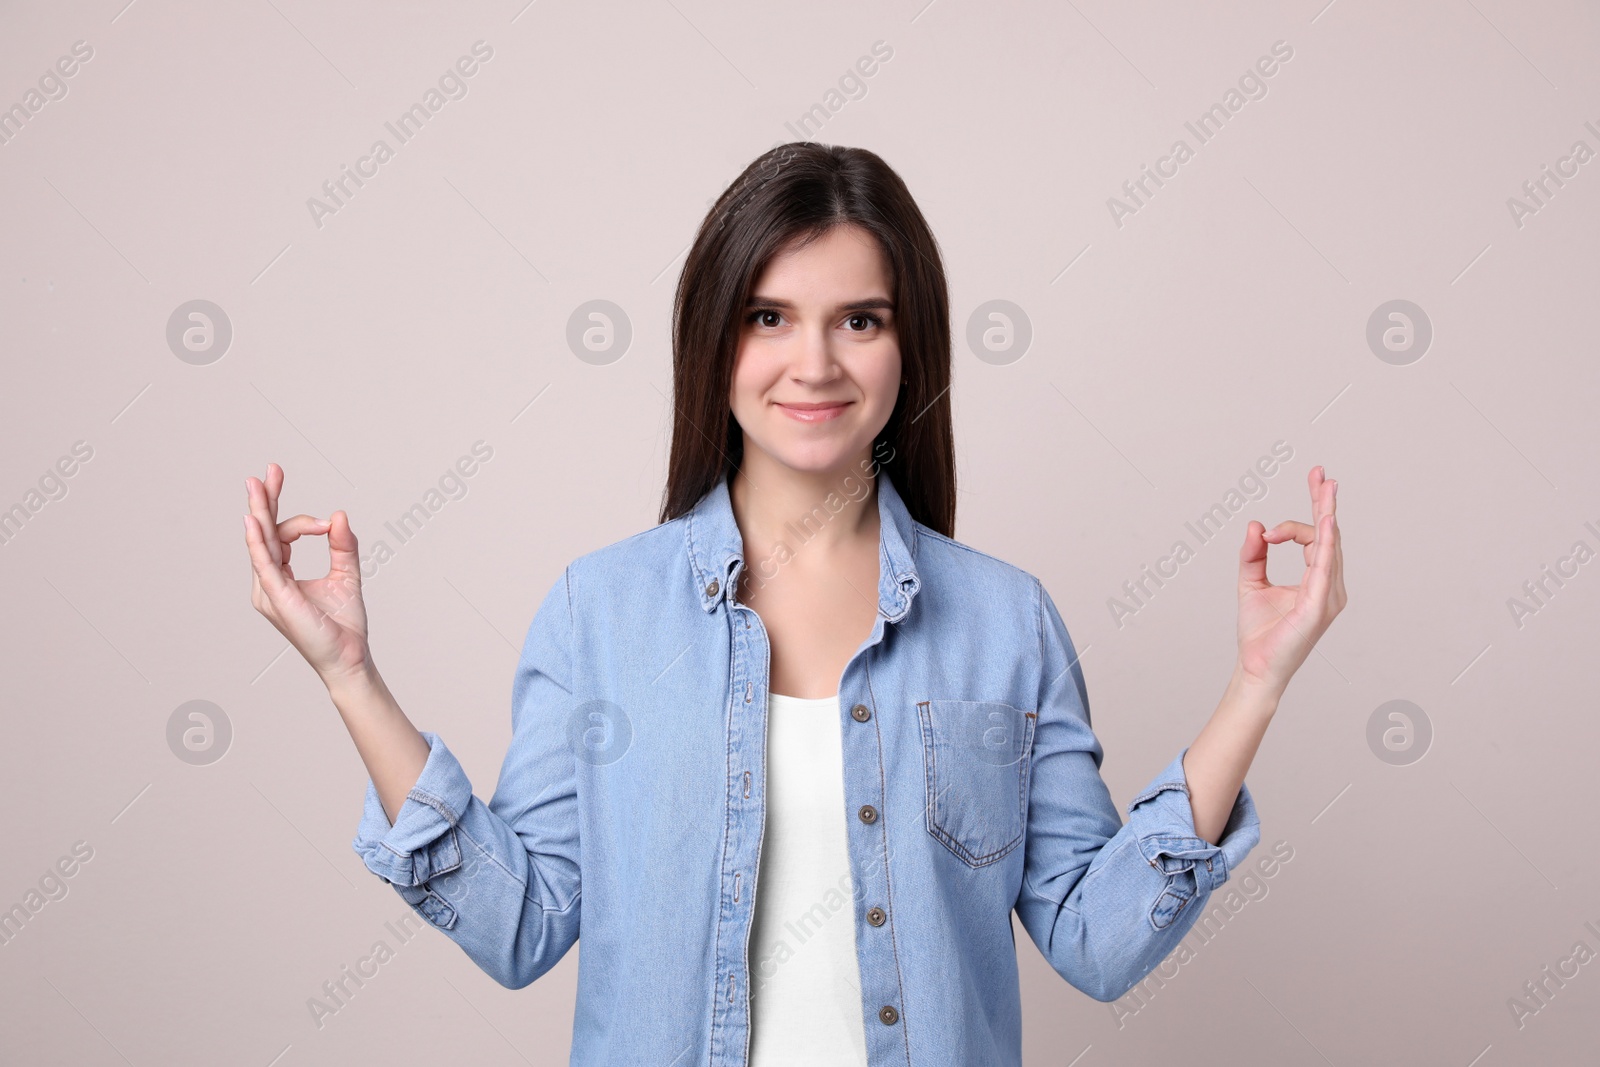 Photo of Young woman meditating on light background. Stress relief exercise